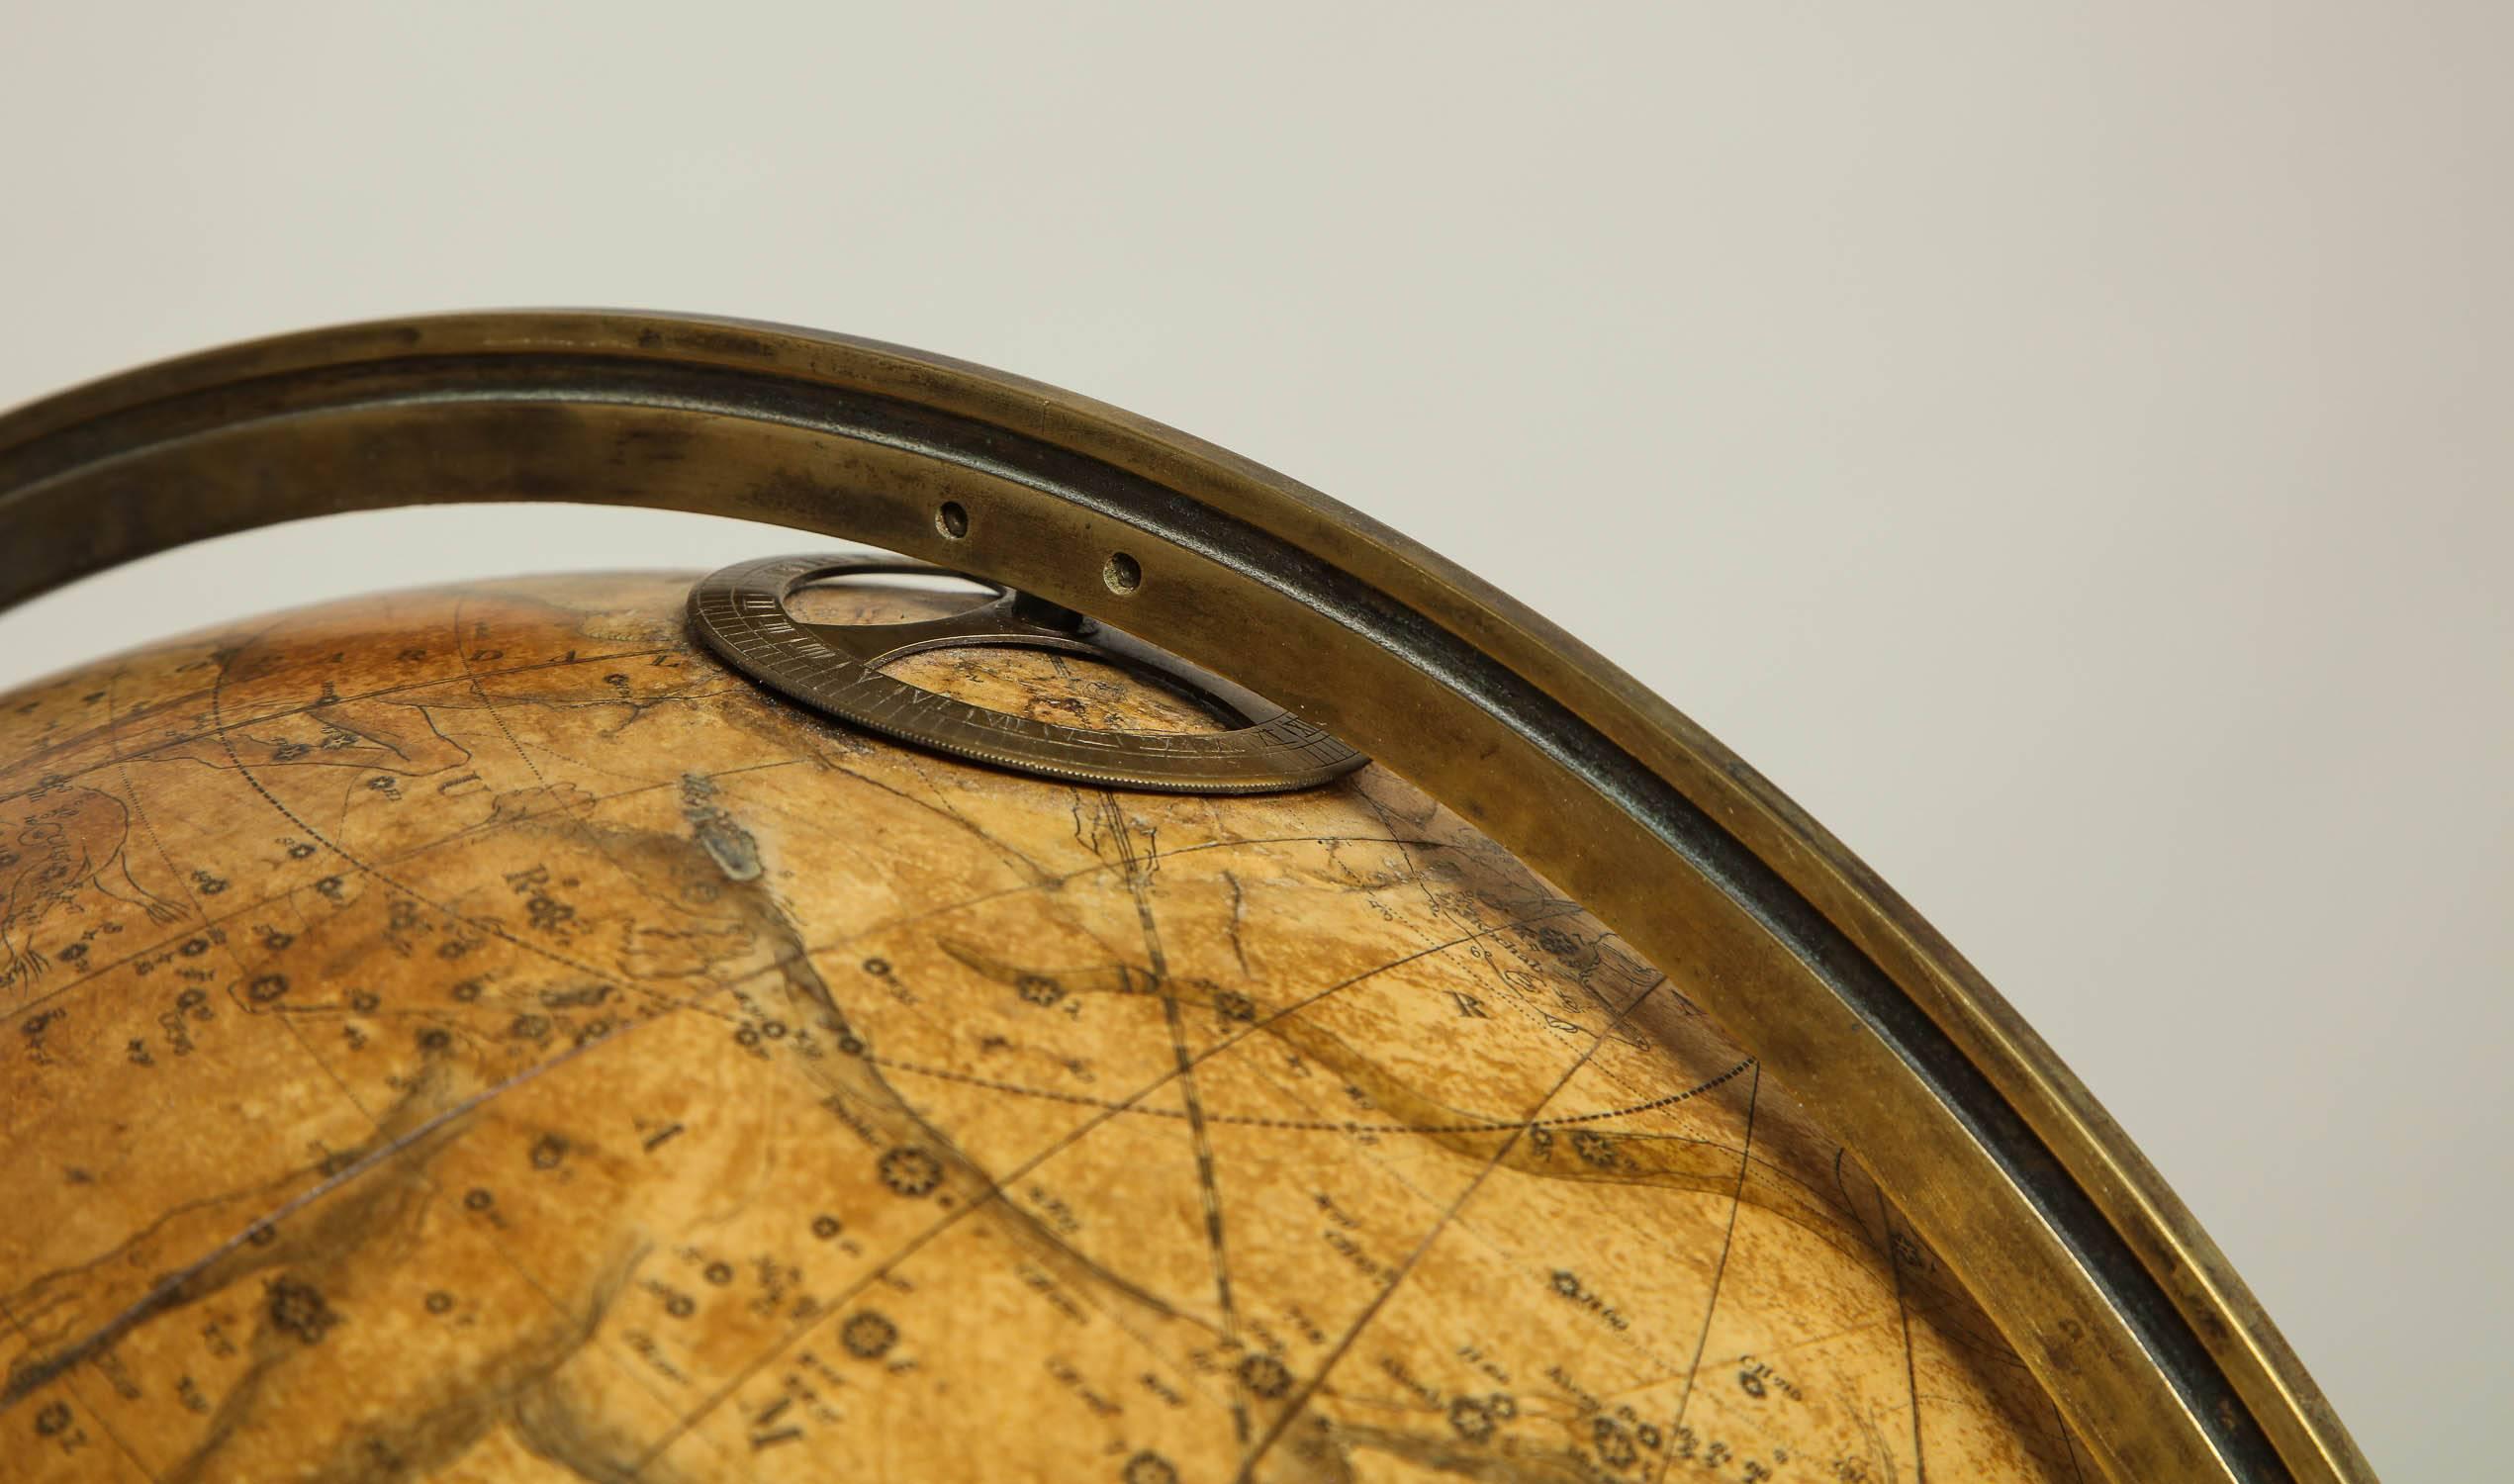 Late 18th Century Early 19th Century Celestial Globe by Cary